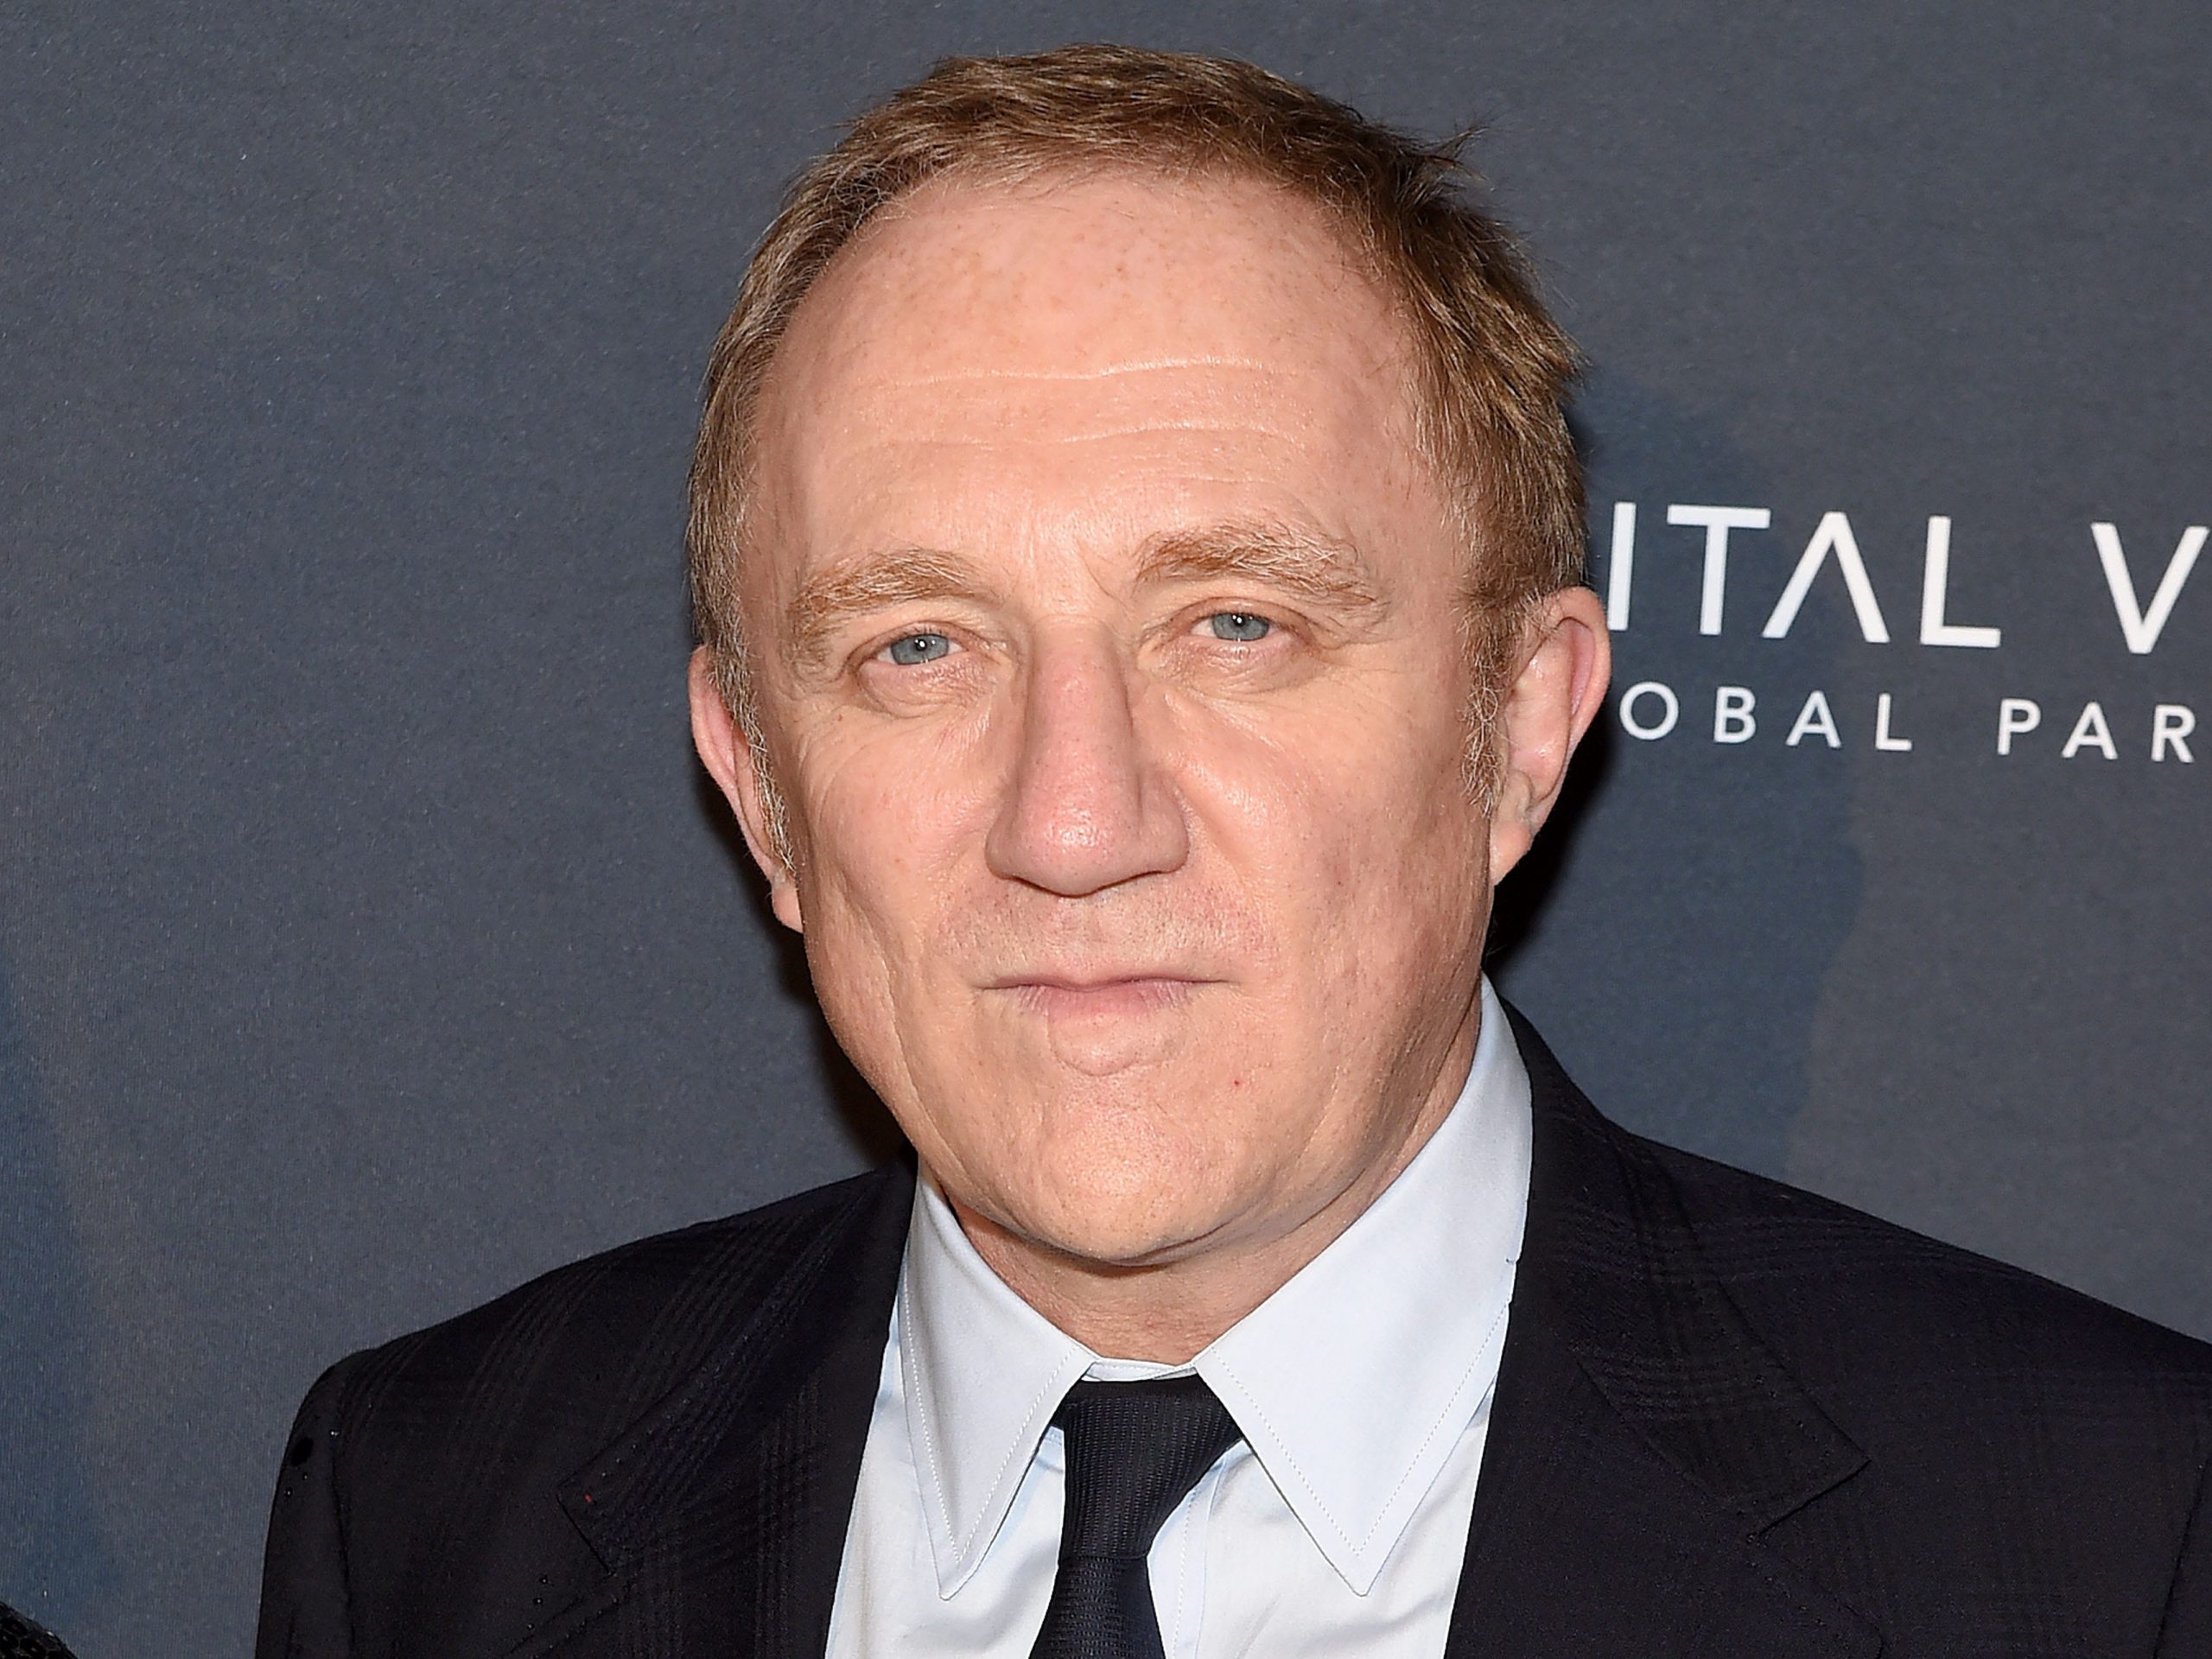 Francois-Henri Pinault attends the 2019 Vital Voices Solidarity Awards at IAC Building on December 09, 2019 in New York City.